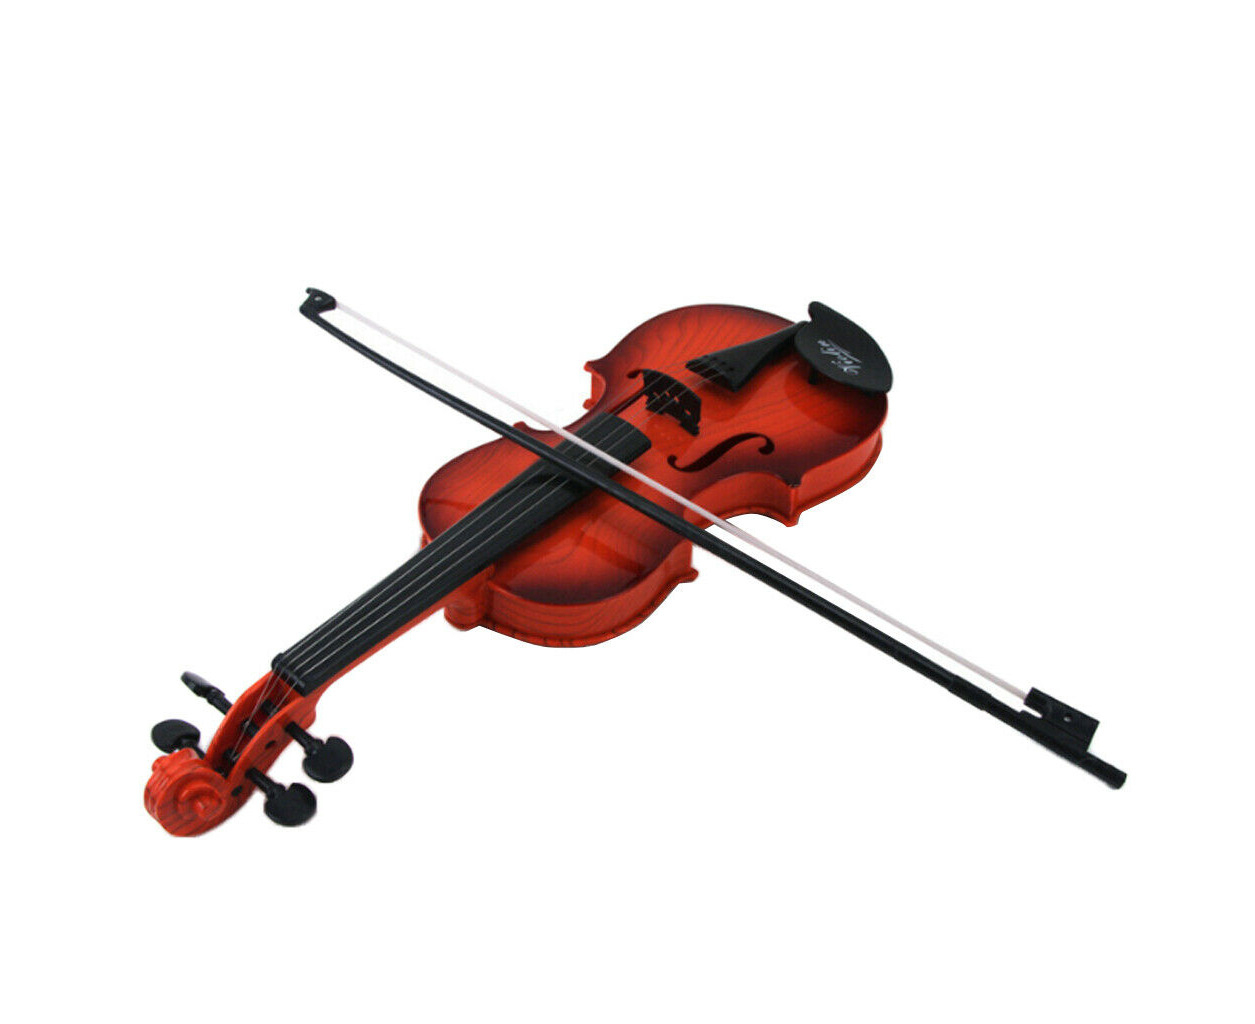 Toy Violin Electronic Toy Violin for Kids learning play violin 